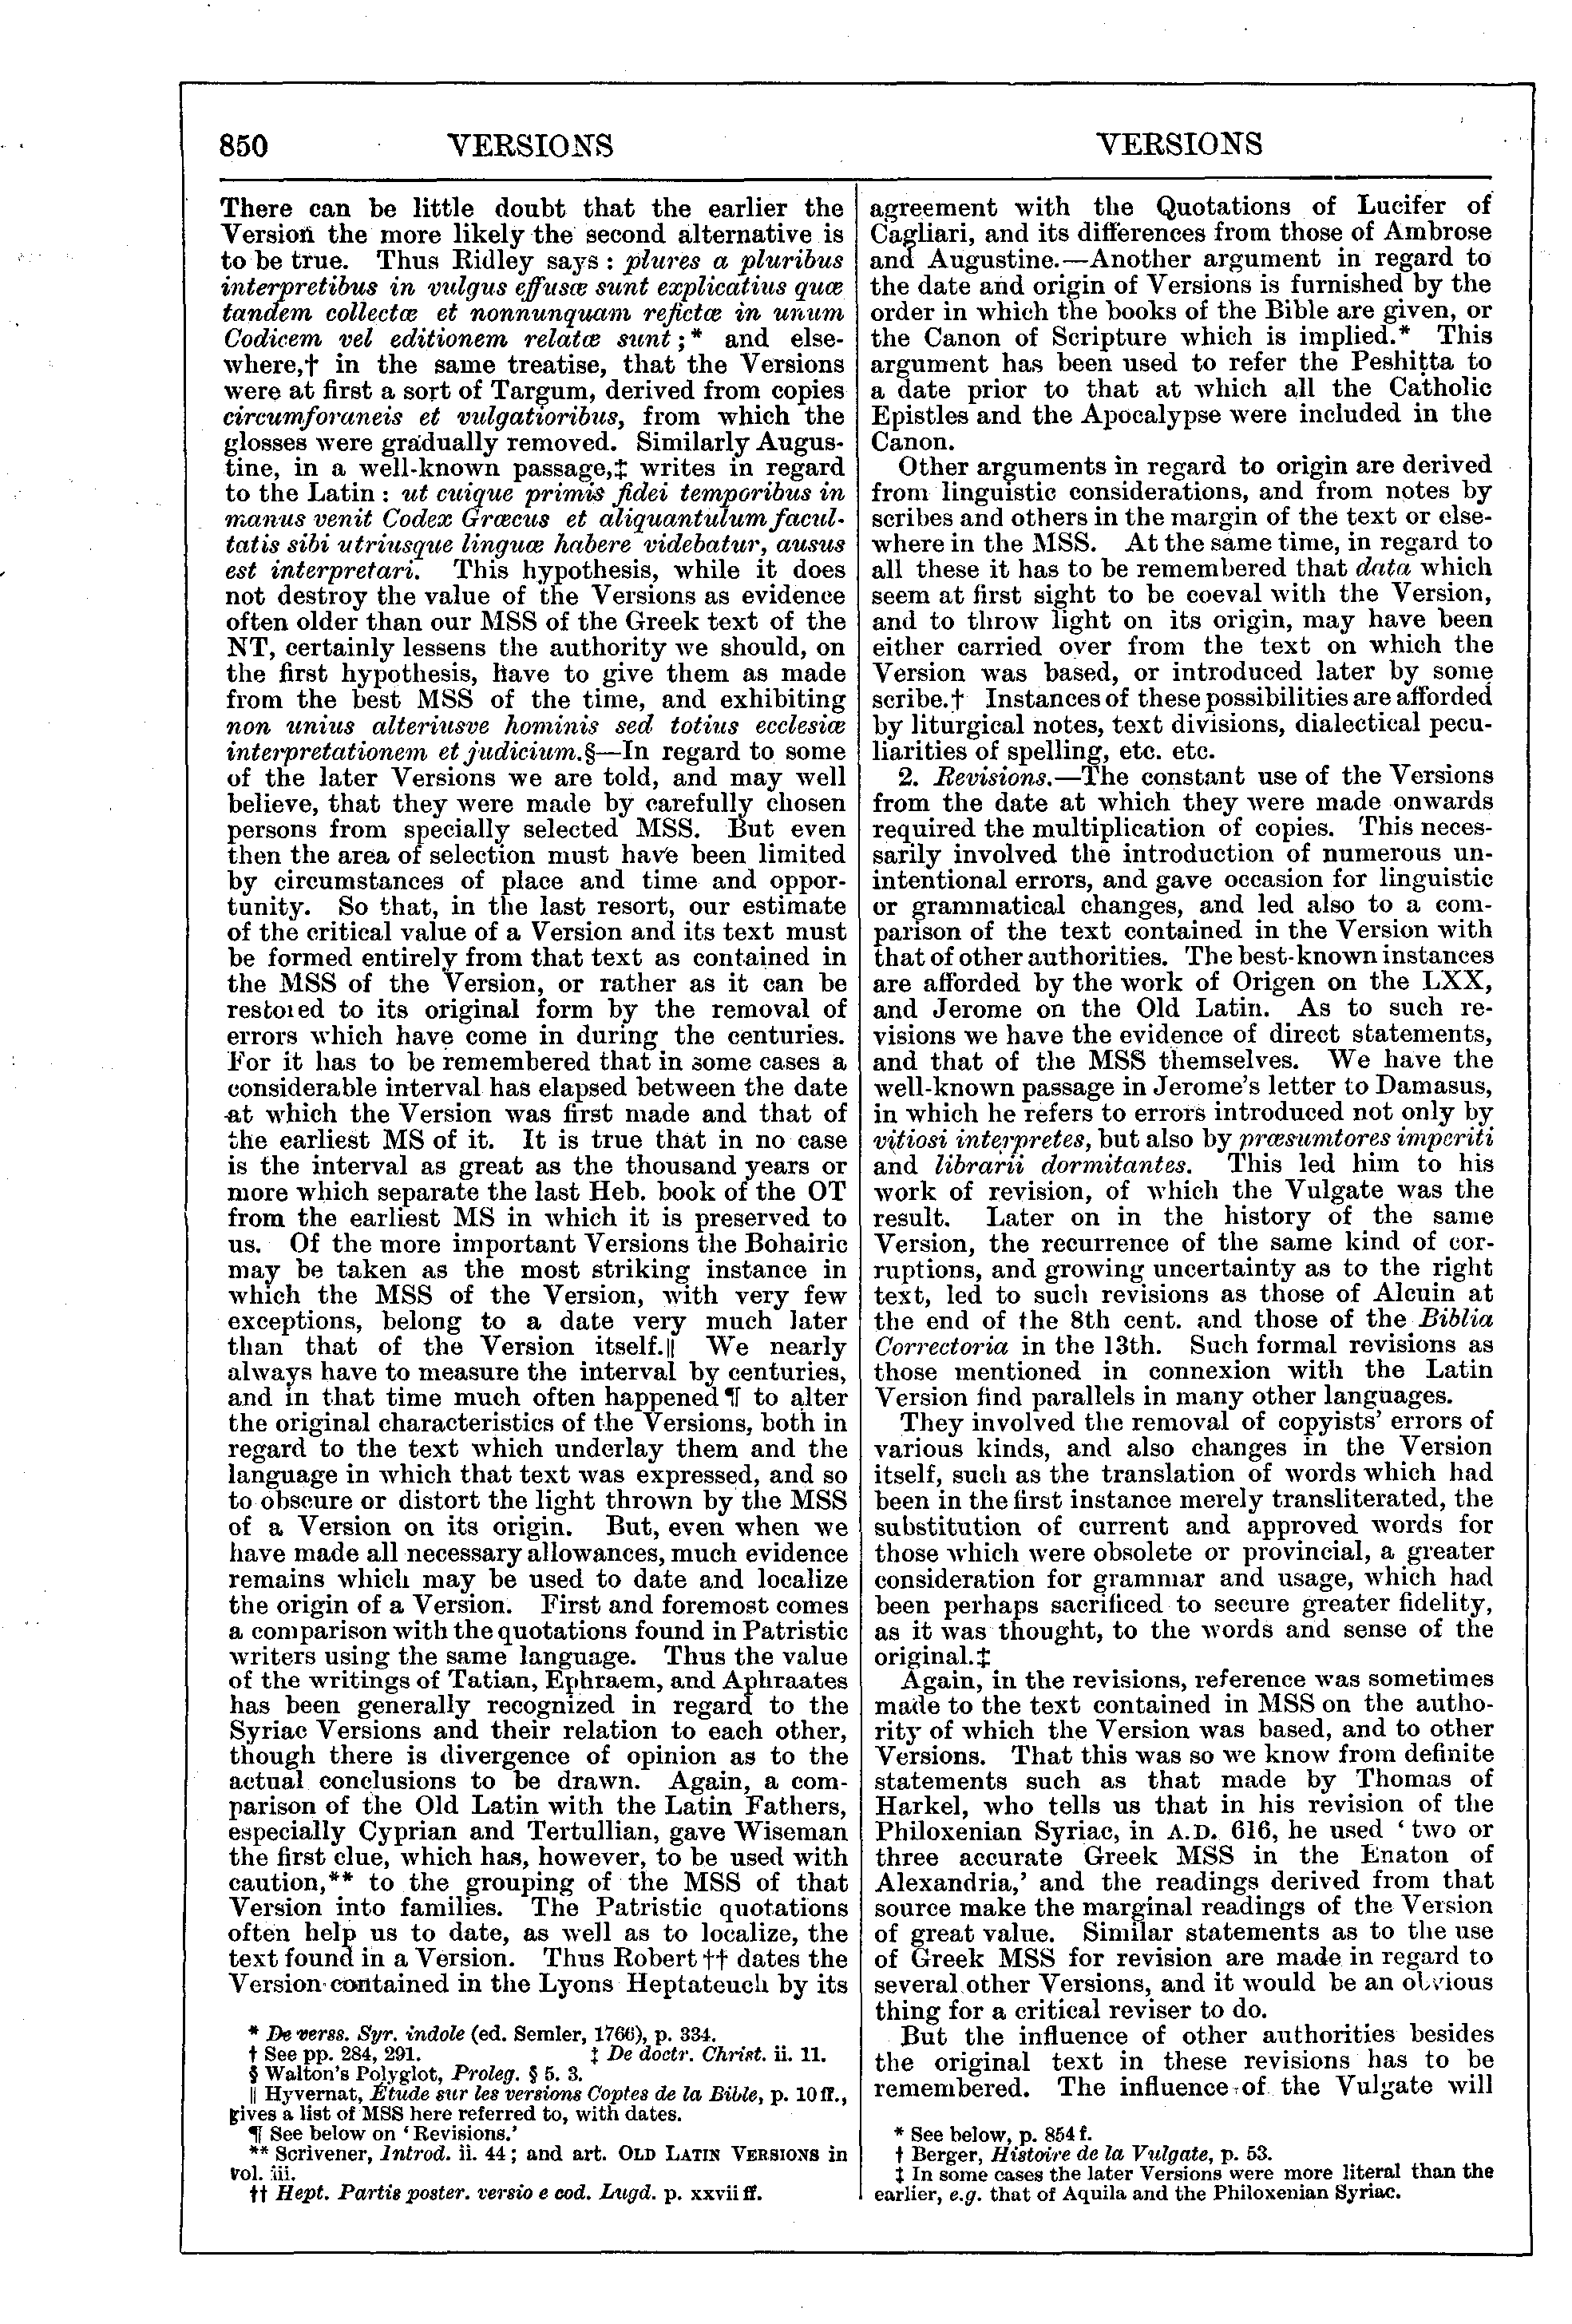 Image of page 850